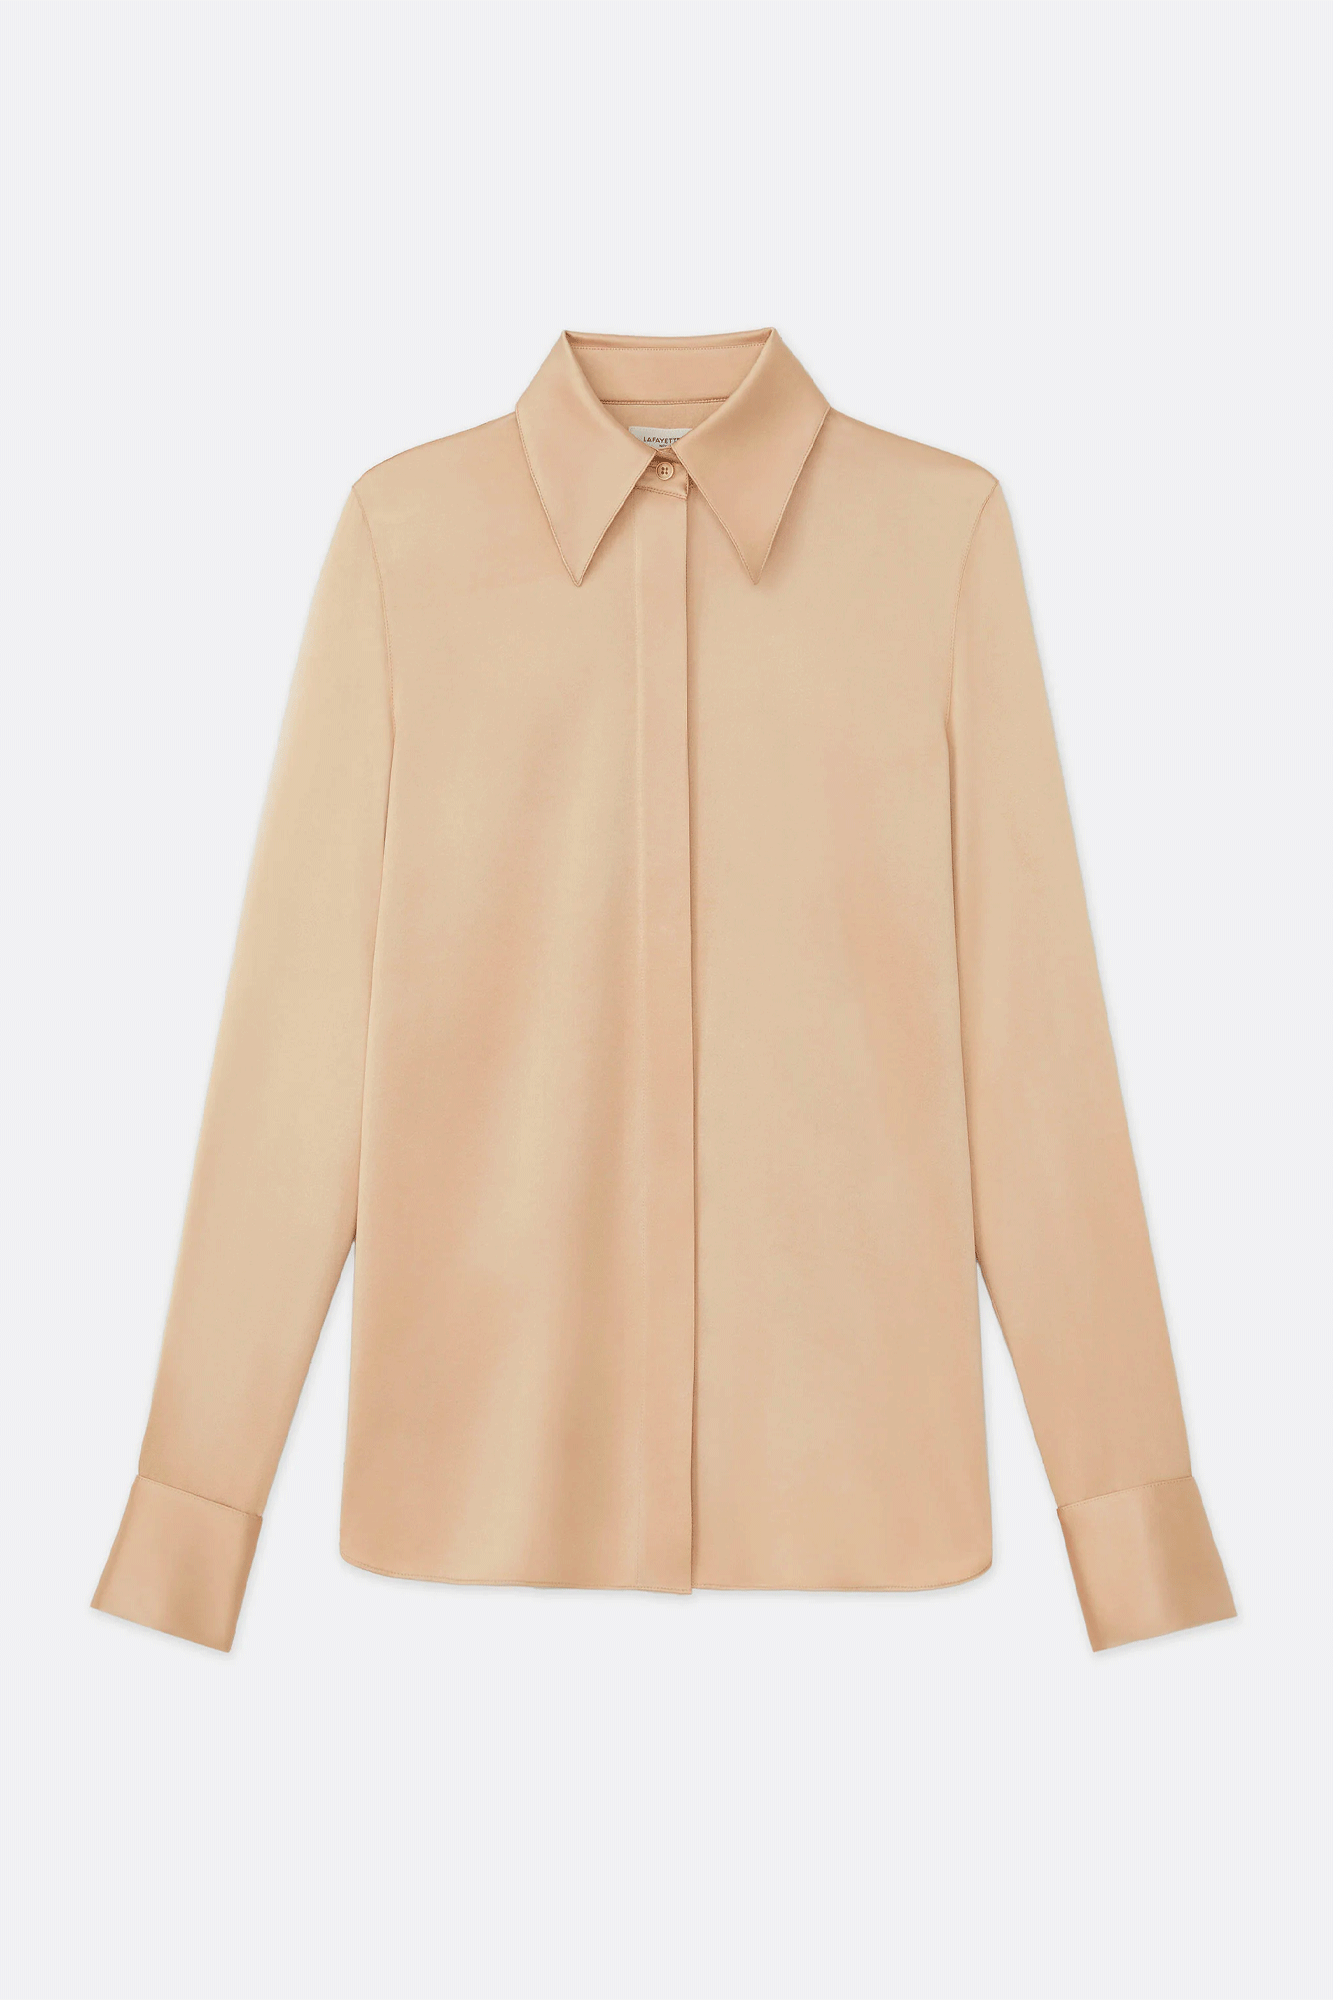 This French Cuffed Blouse is cut from luxe, lustrous silk charmeuse, giving it a timeless, modern look. It features a sharp shirt collar, button cuffs, a hidden front placket, and long sleeve design. Effortless and chic, you can dress this up or down for any occasion.